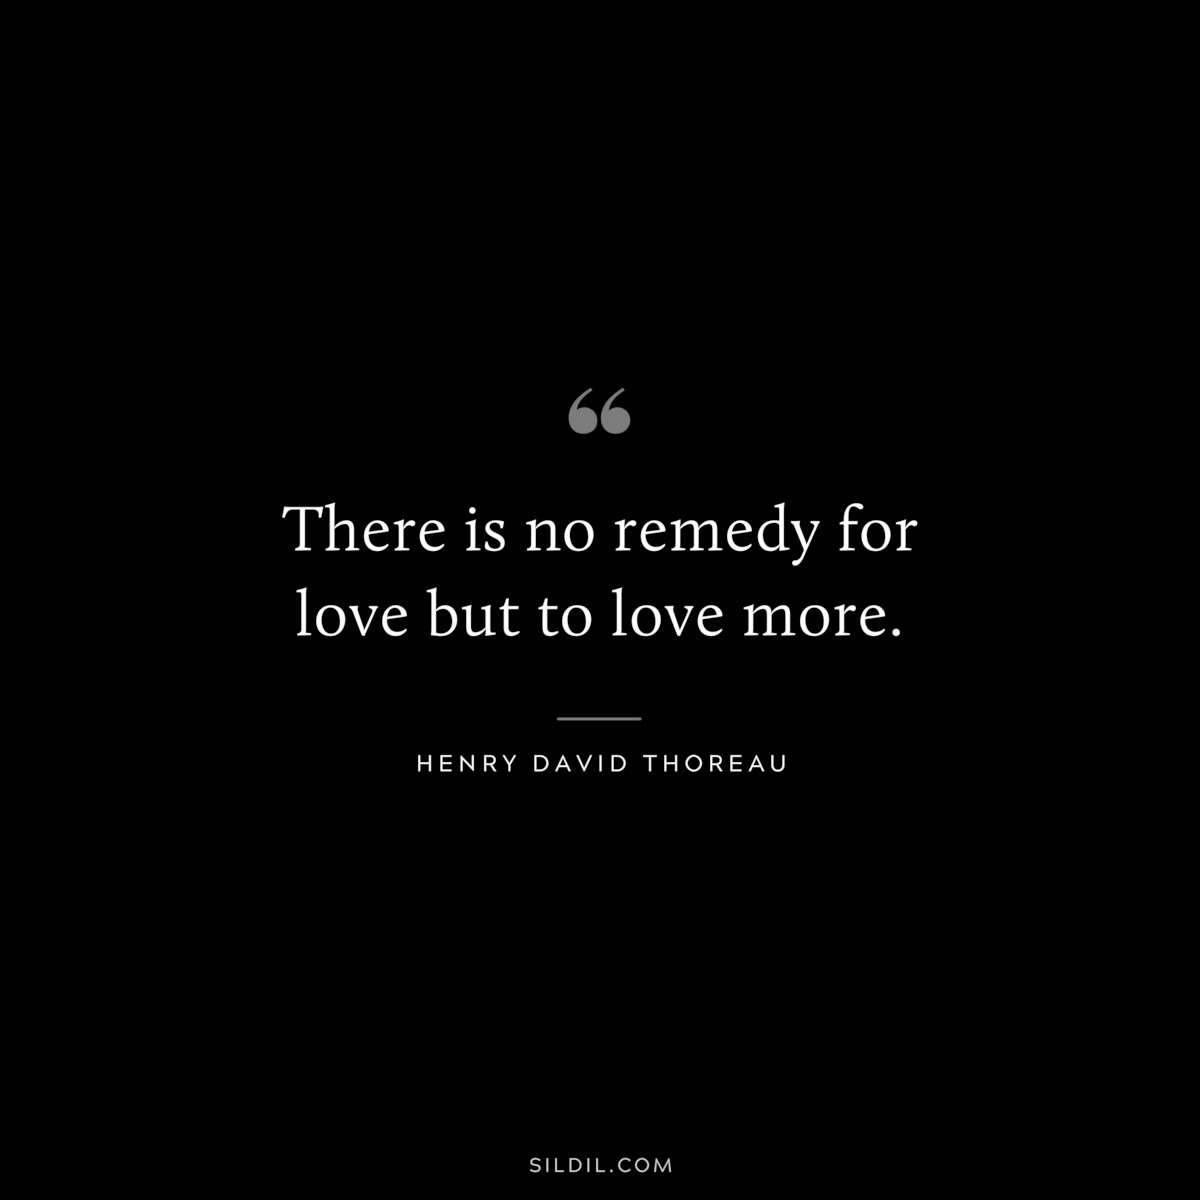 There is no remedy for love but to love more. — Henry David Thoreau